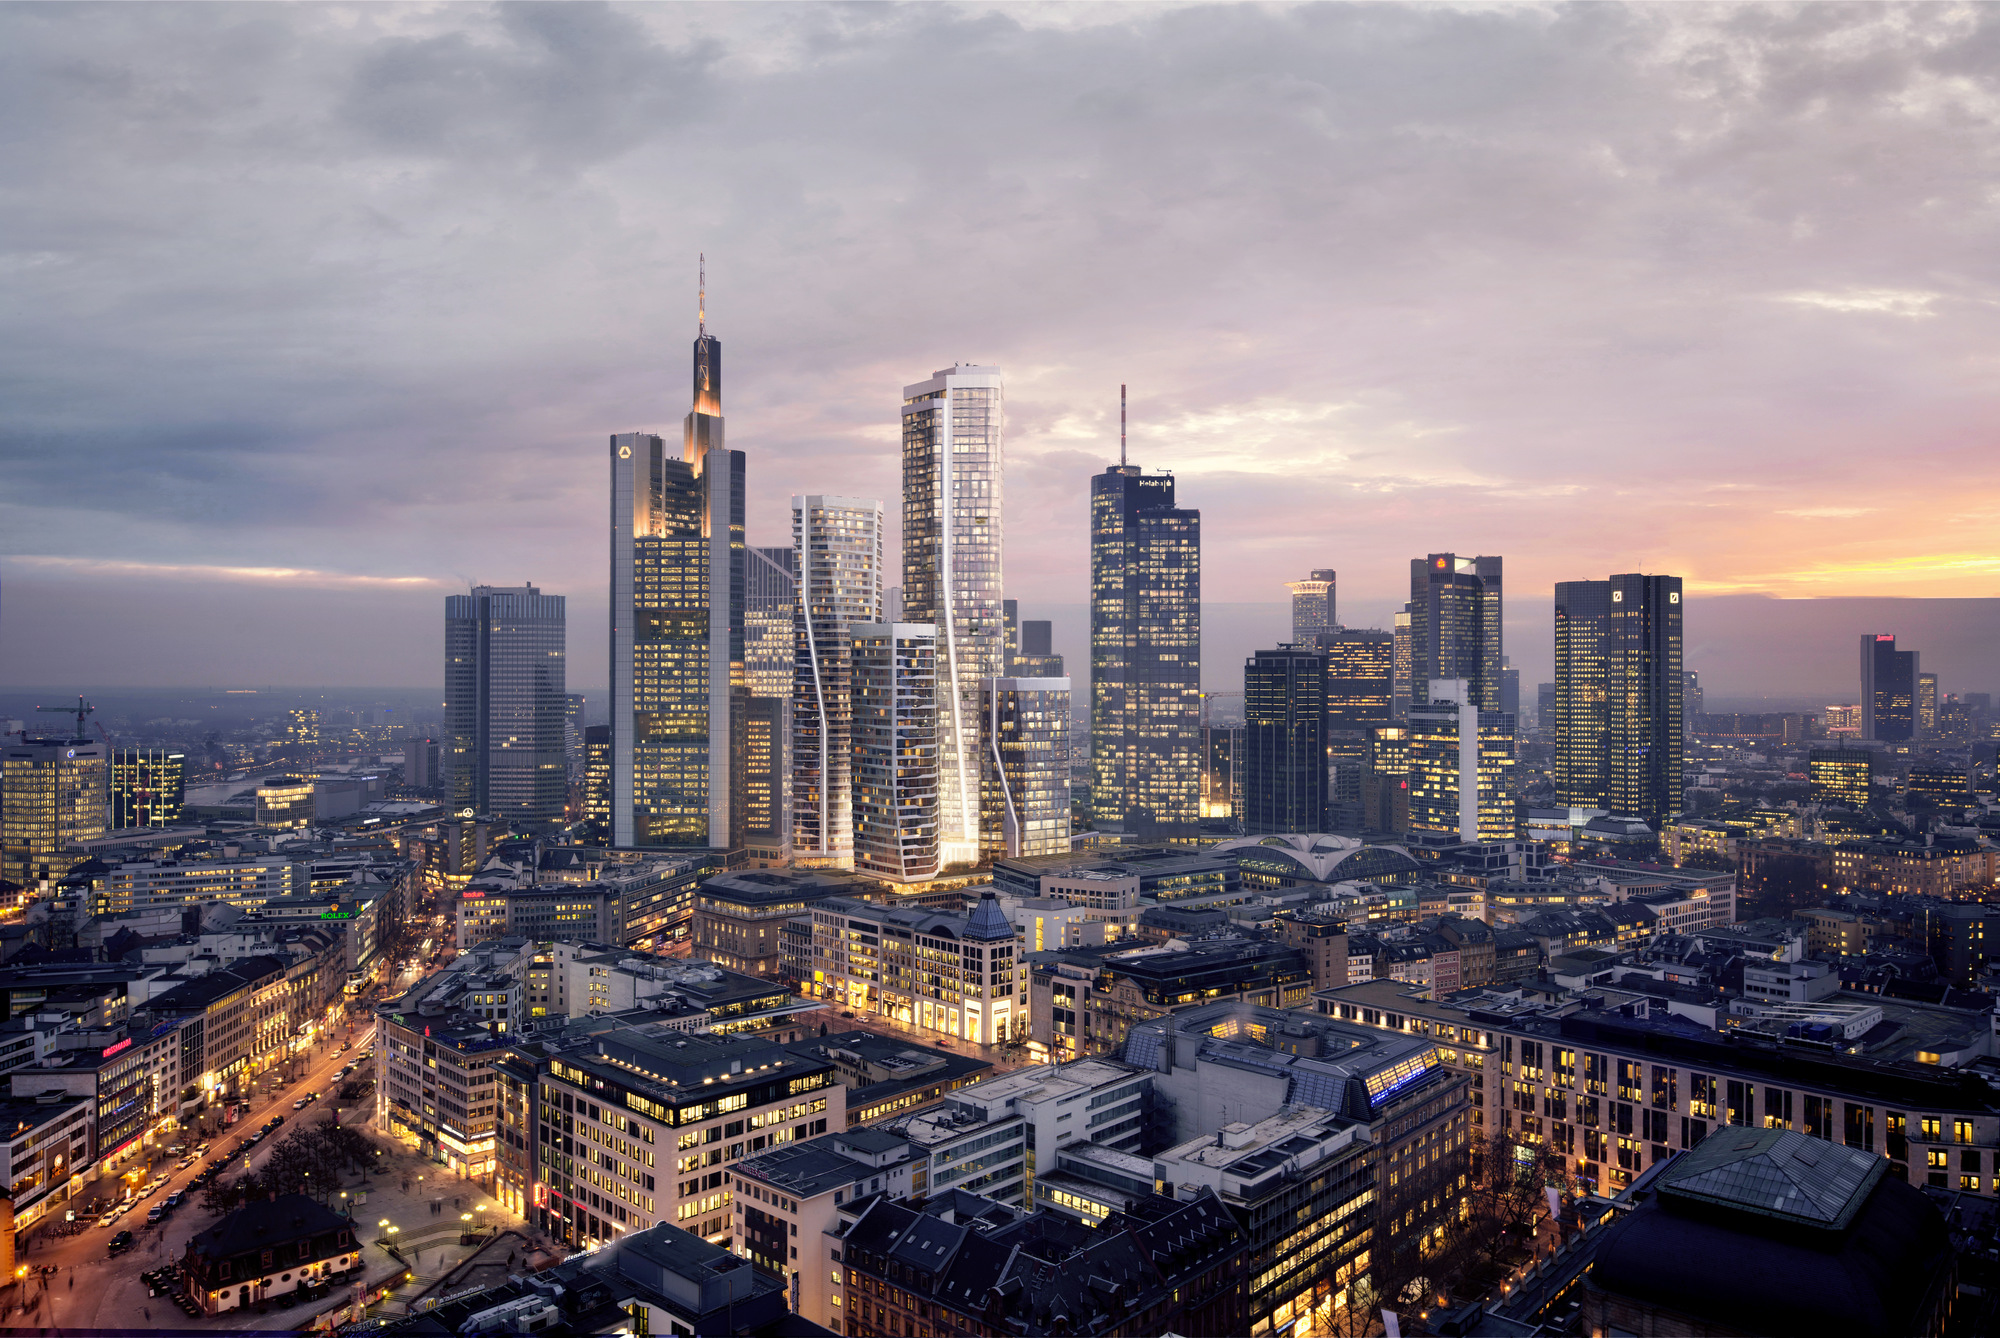 A 'City for All' - UNStudio unanimous winner of the architectural competition for the former Deutsche Bank site in Frankfurt